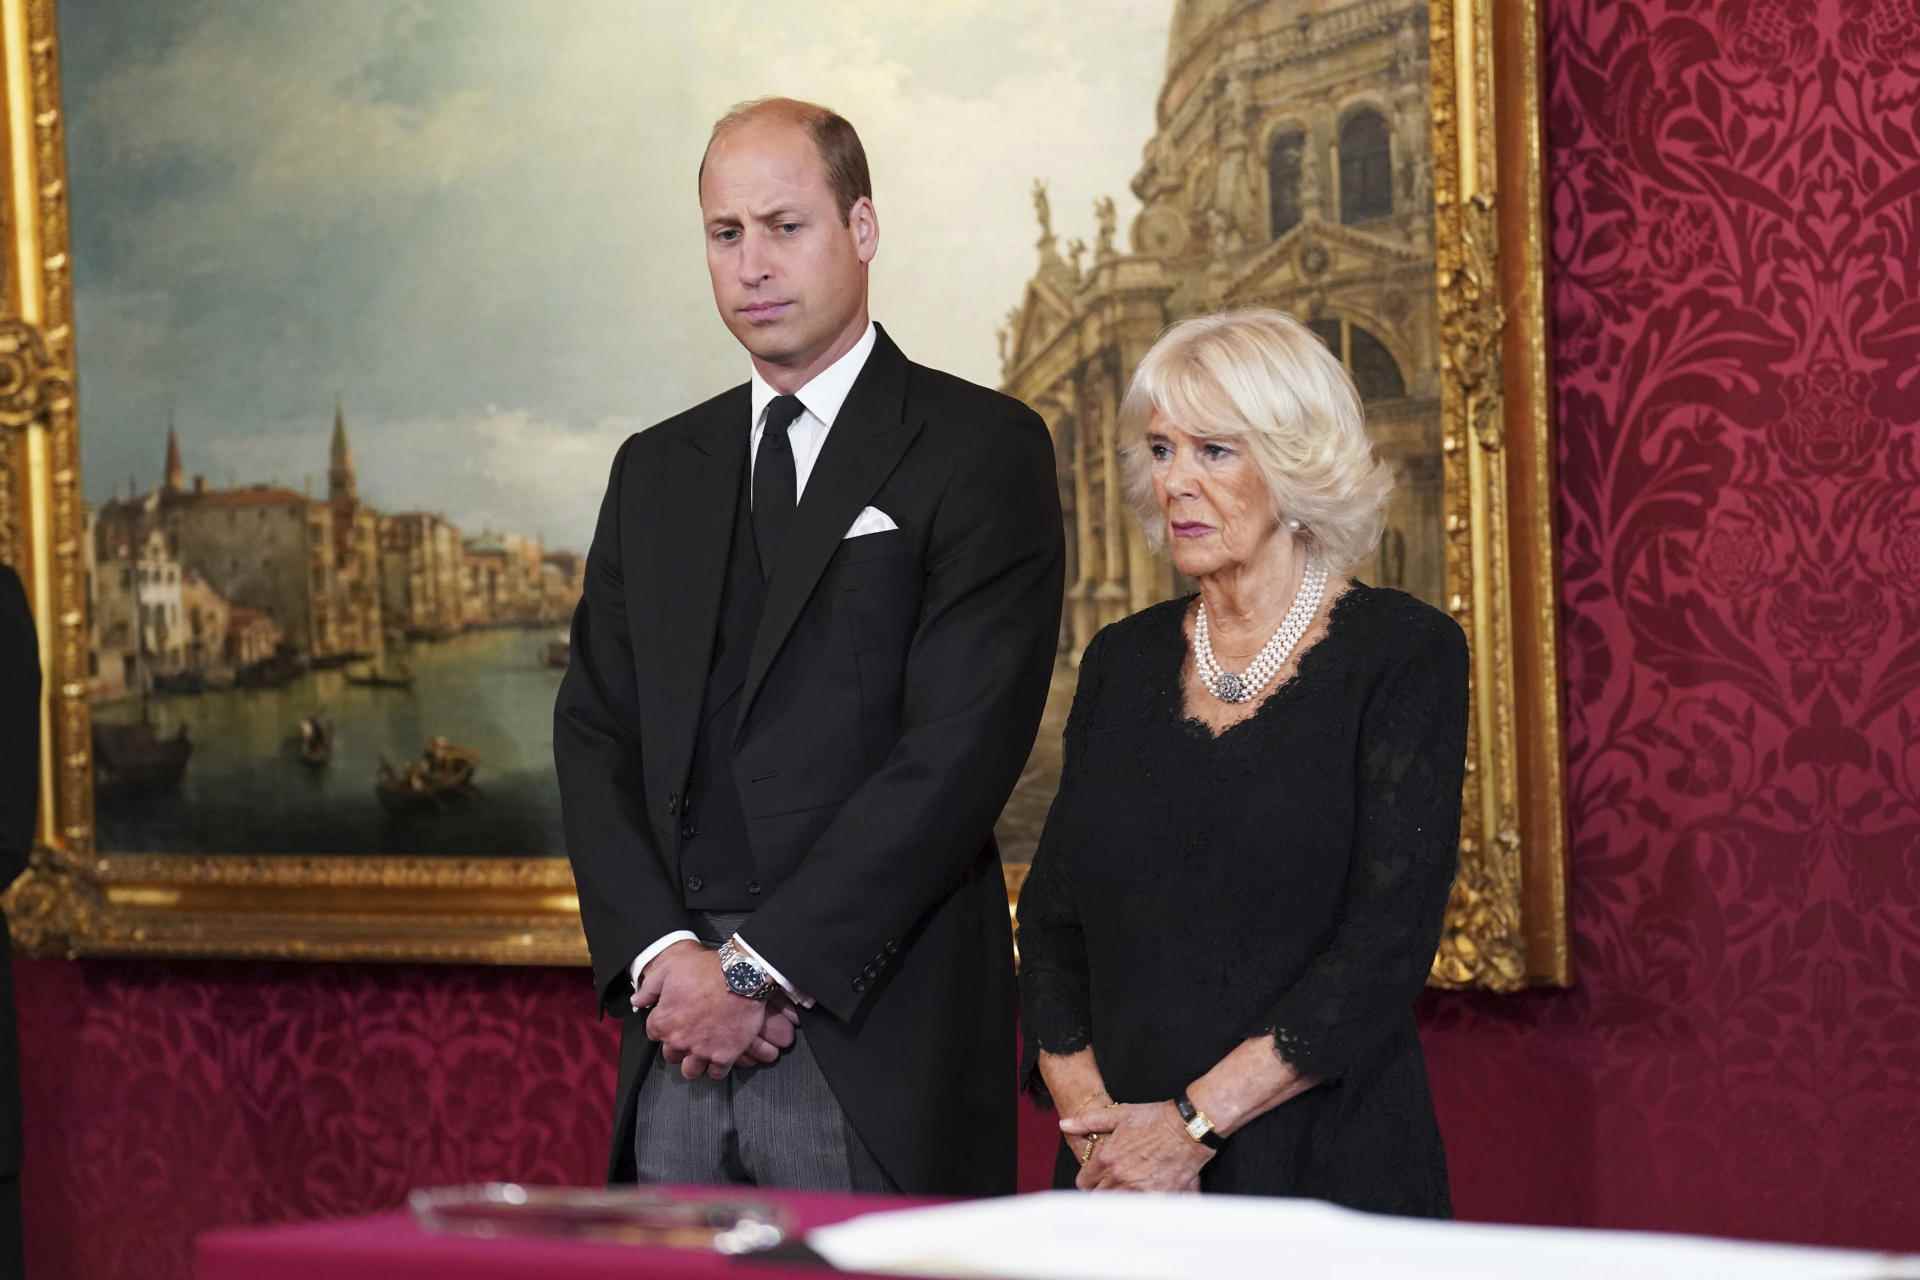 Prince William and Queen Consort Camilla, during the Accession Council ceremony at St. James's Palace, London, September 10, 2022.